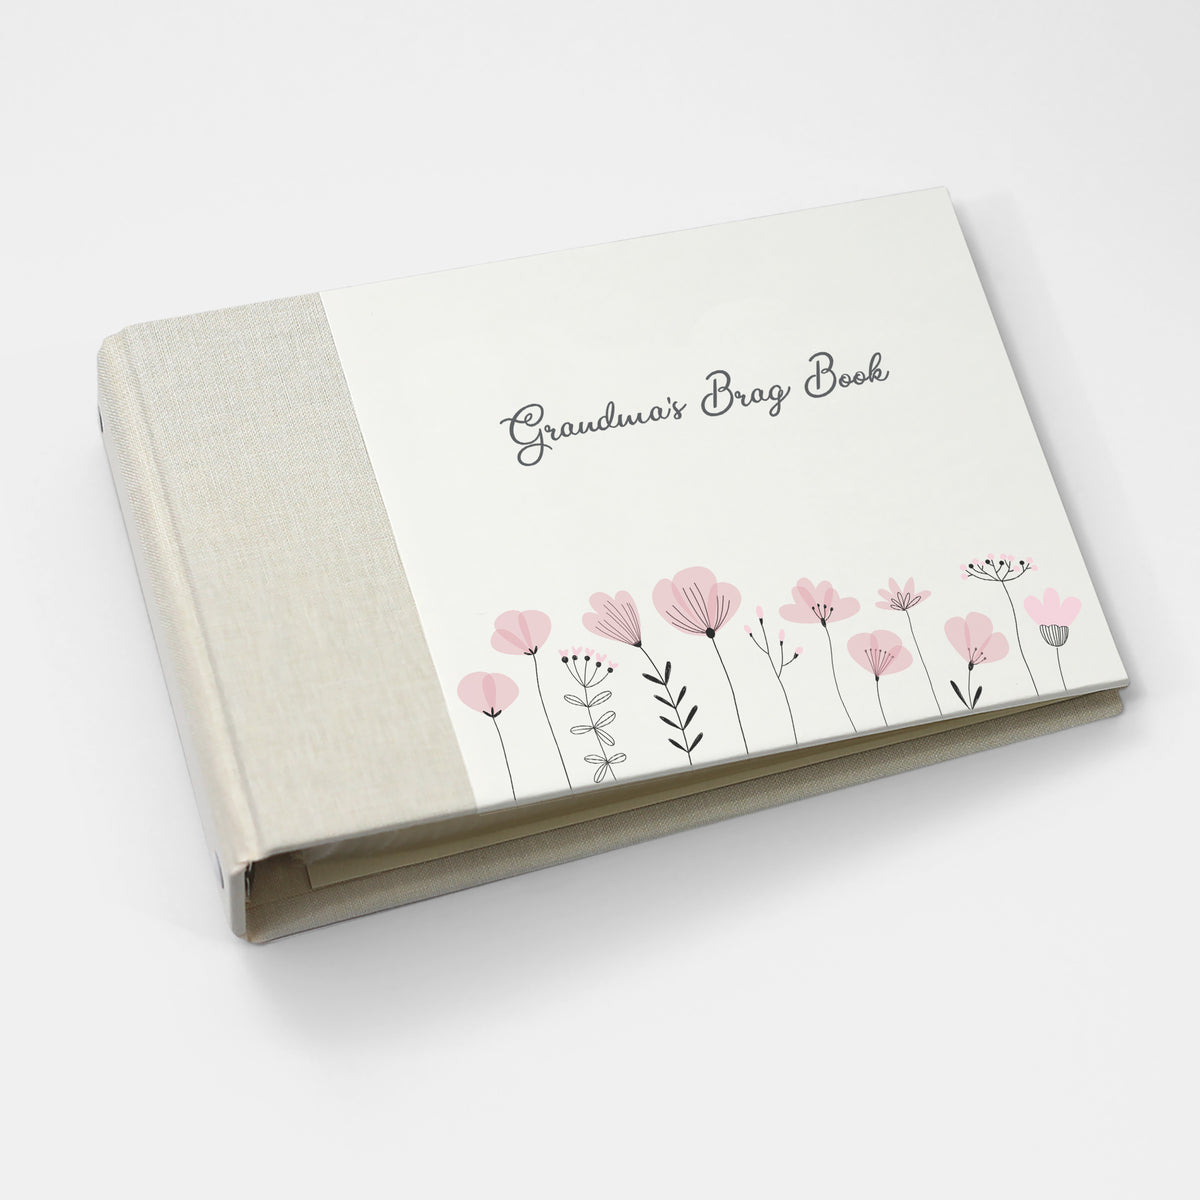 Grandma&#39;s Brag Book | Printed Cover: Flower Field [Pink] | Available Personalized